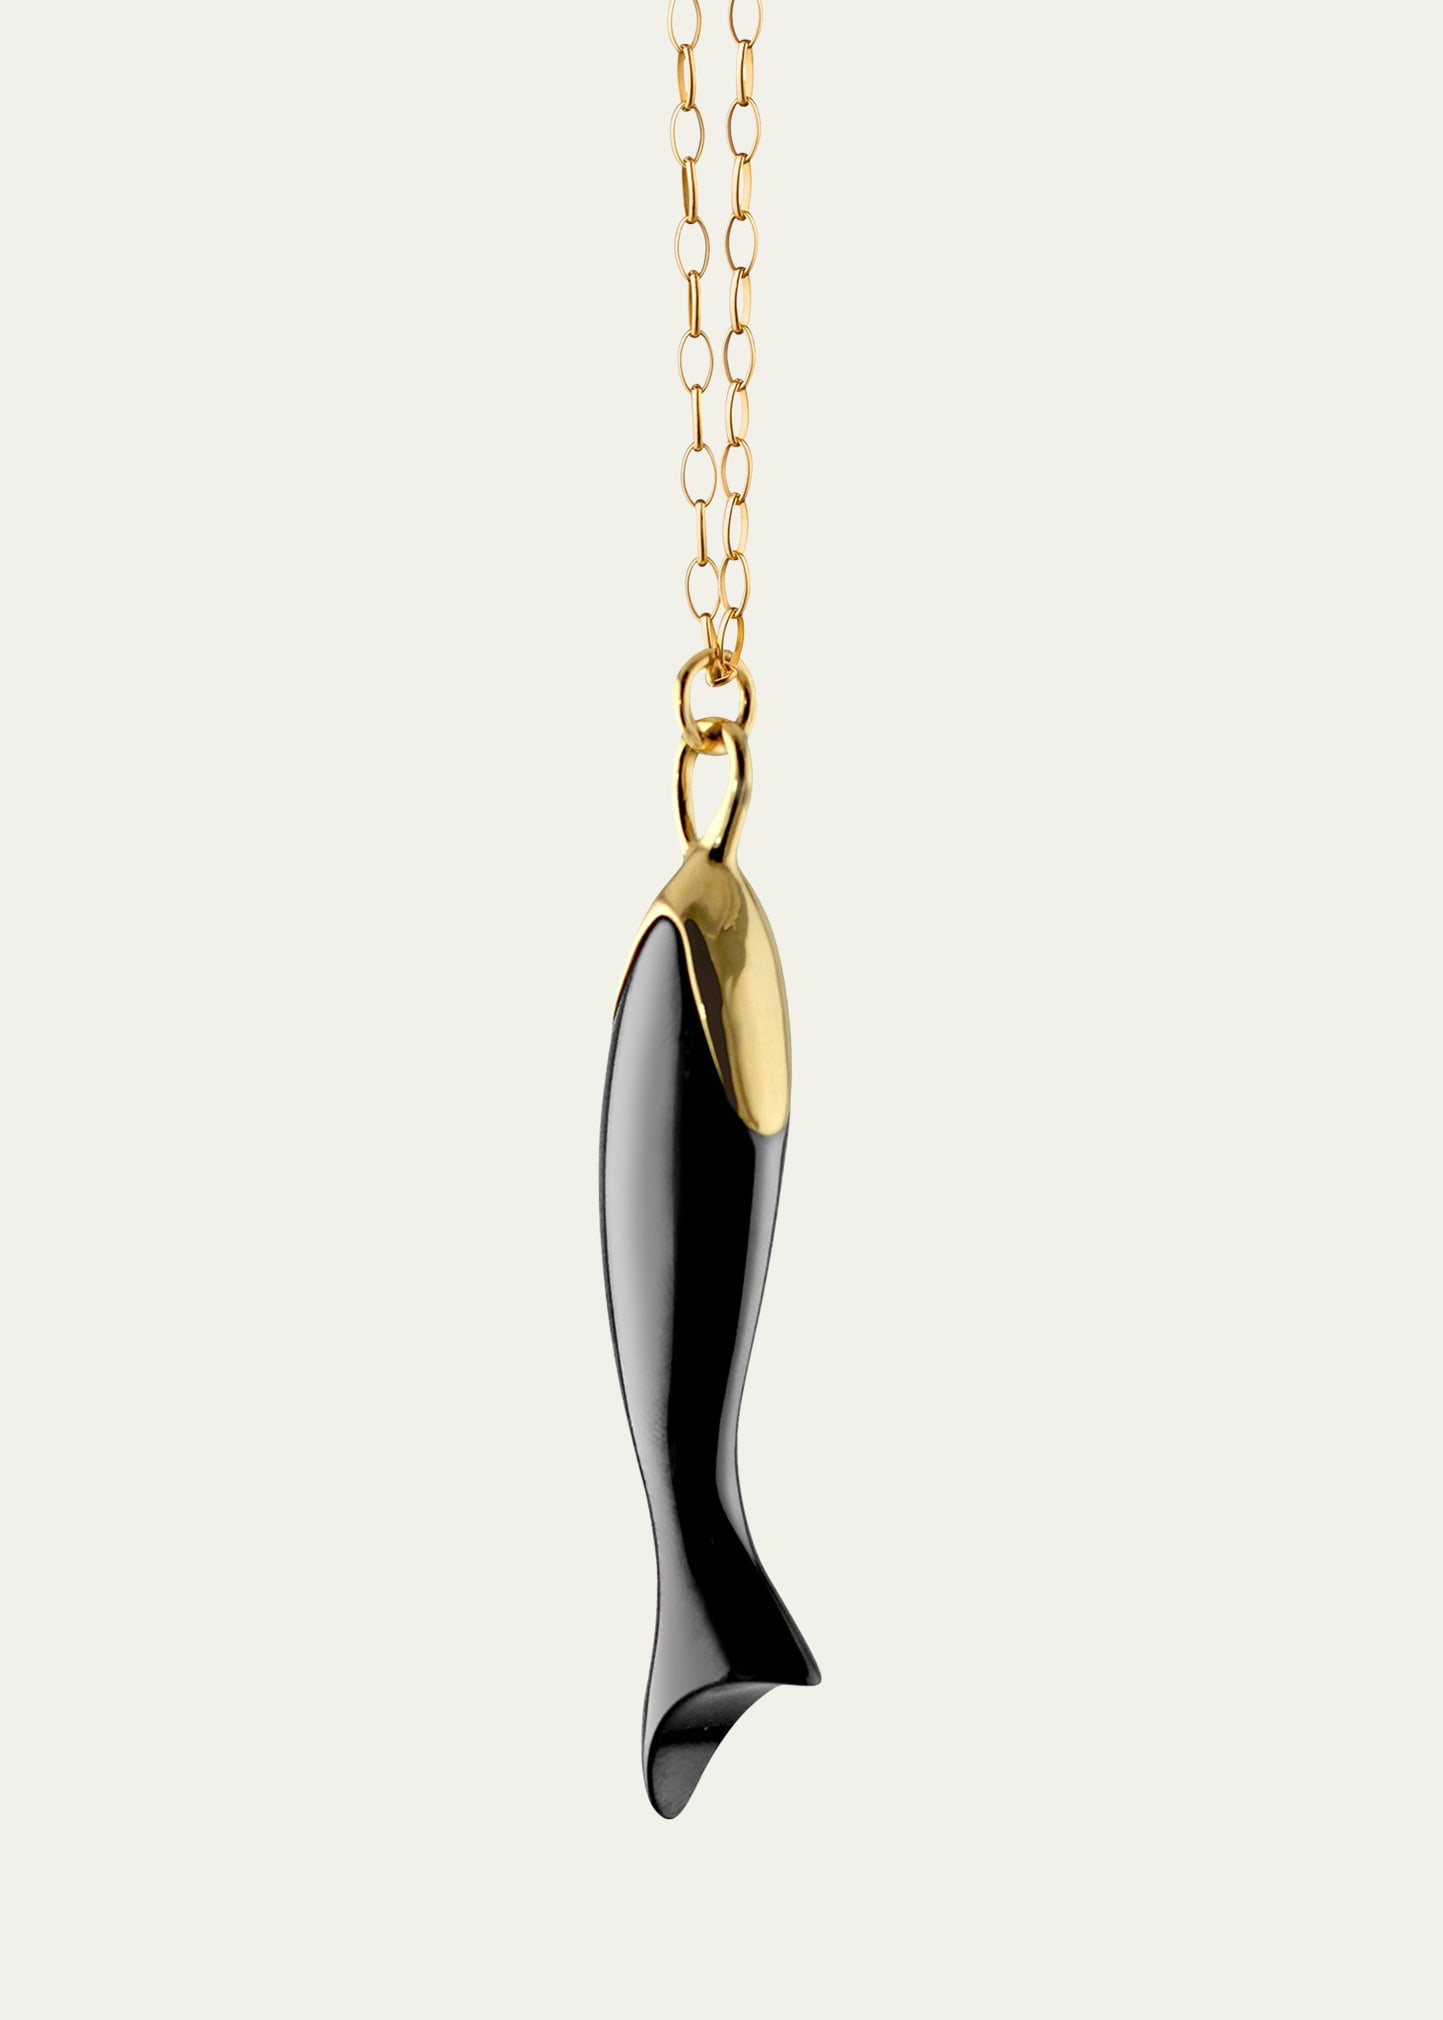 "Perseverance" Ceramic and 18K Gold Fish Necklace